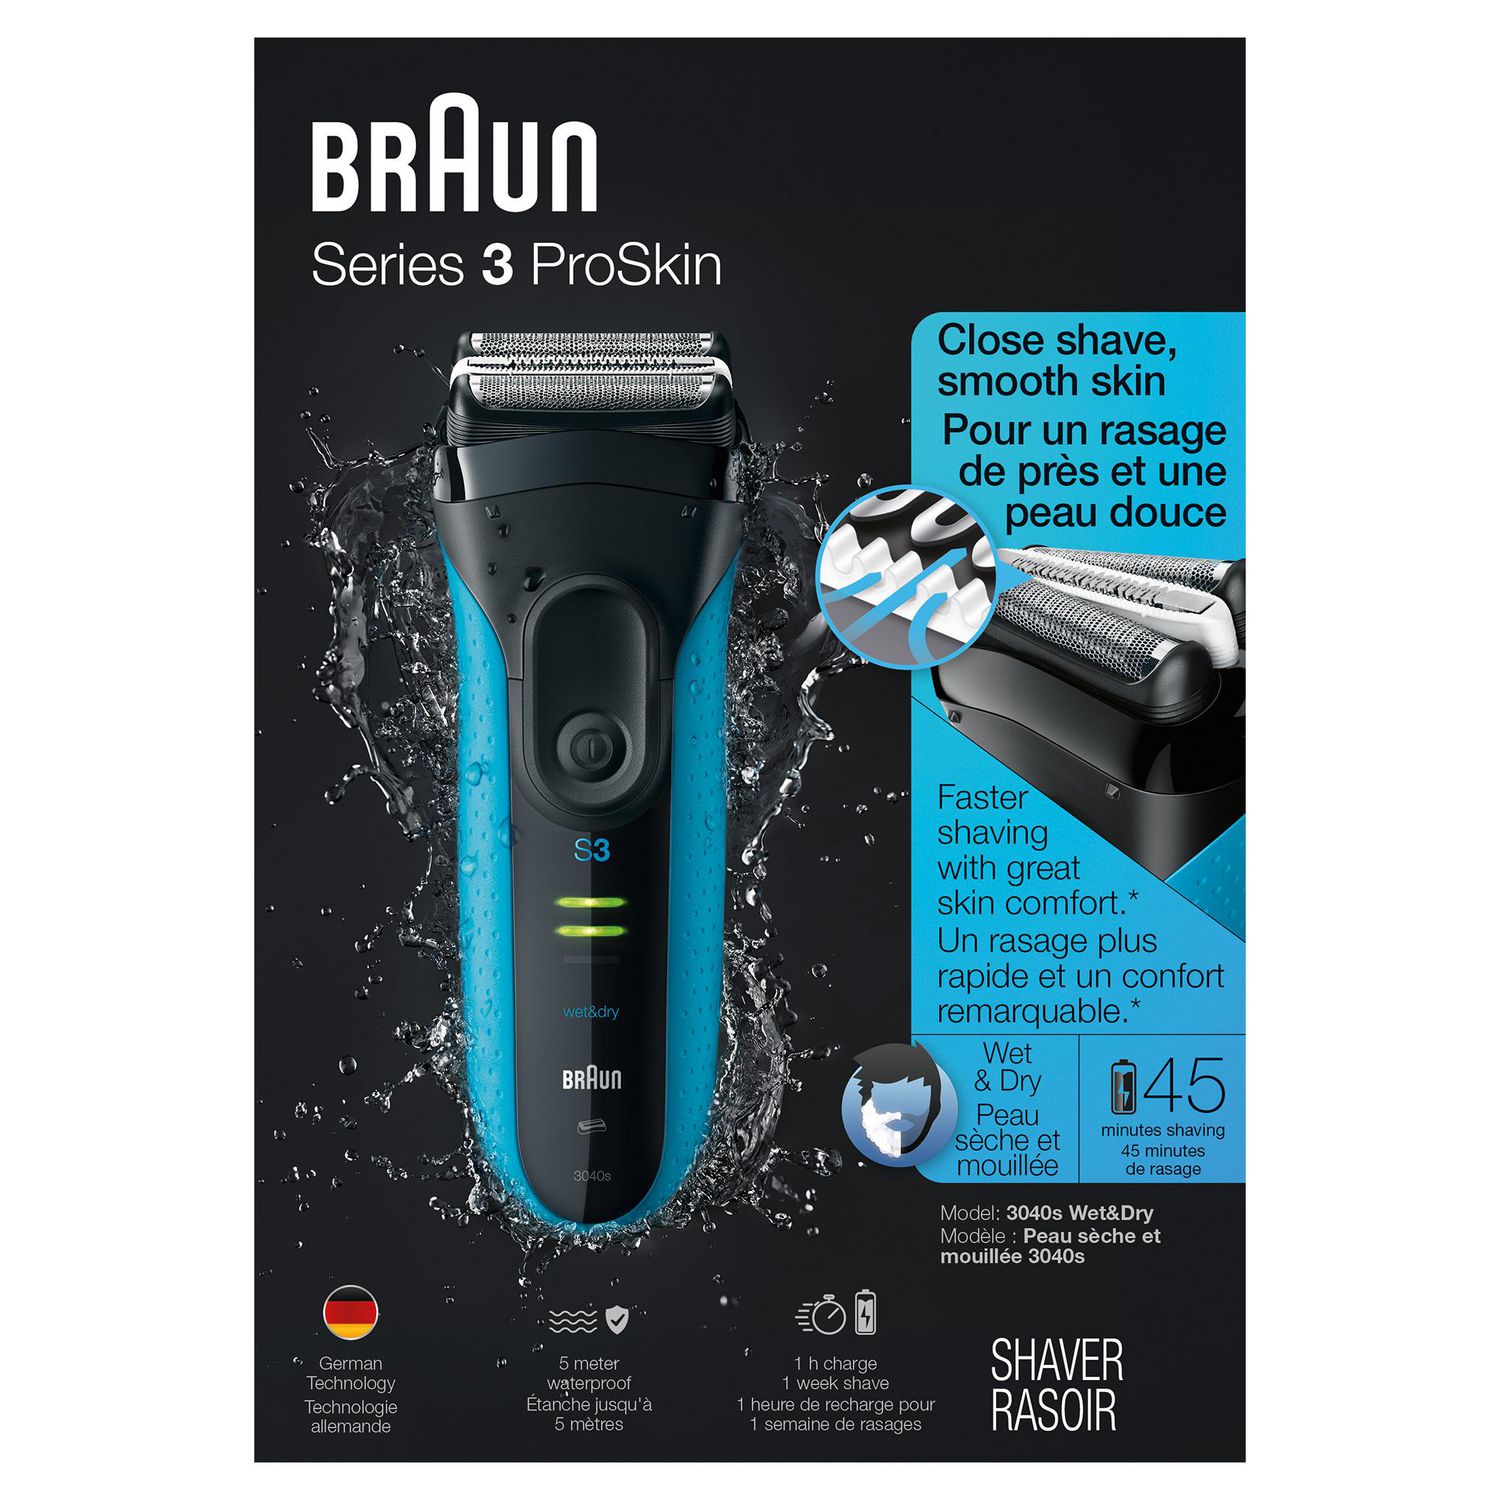 Braun Series 3 Proskin Shave&Style Black/Blue, Electric Men, and 3-in-1 Razor for Wet 1 Dry Shaver, Set